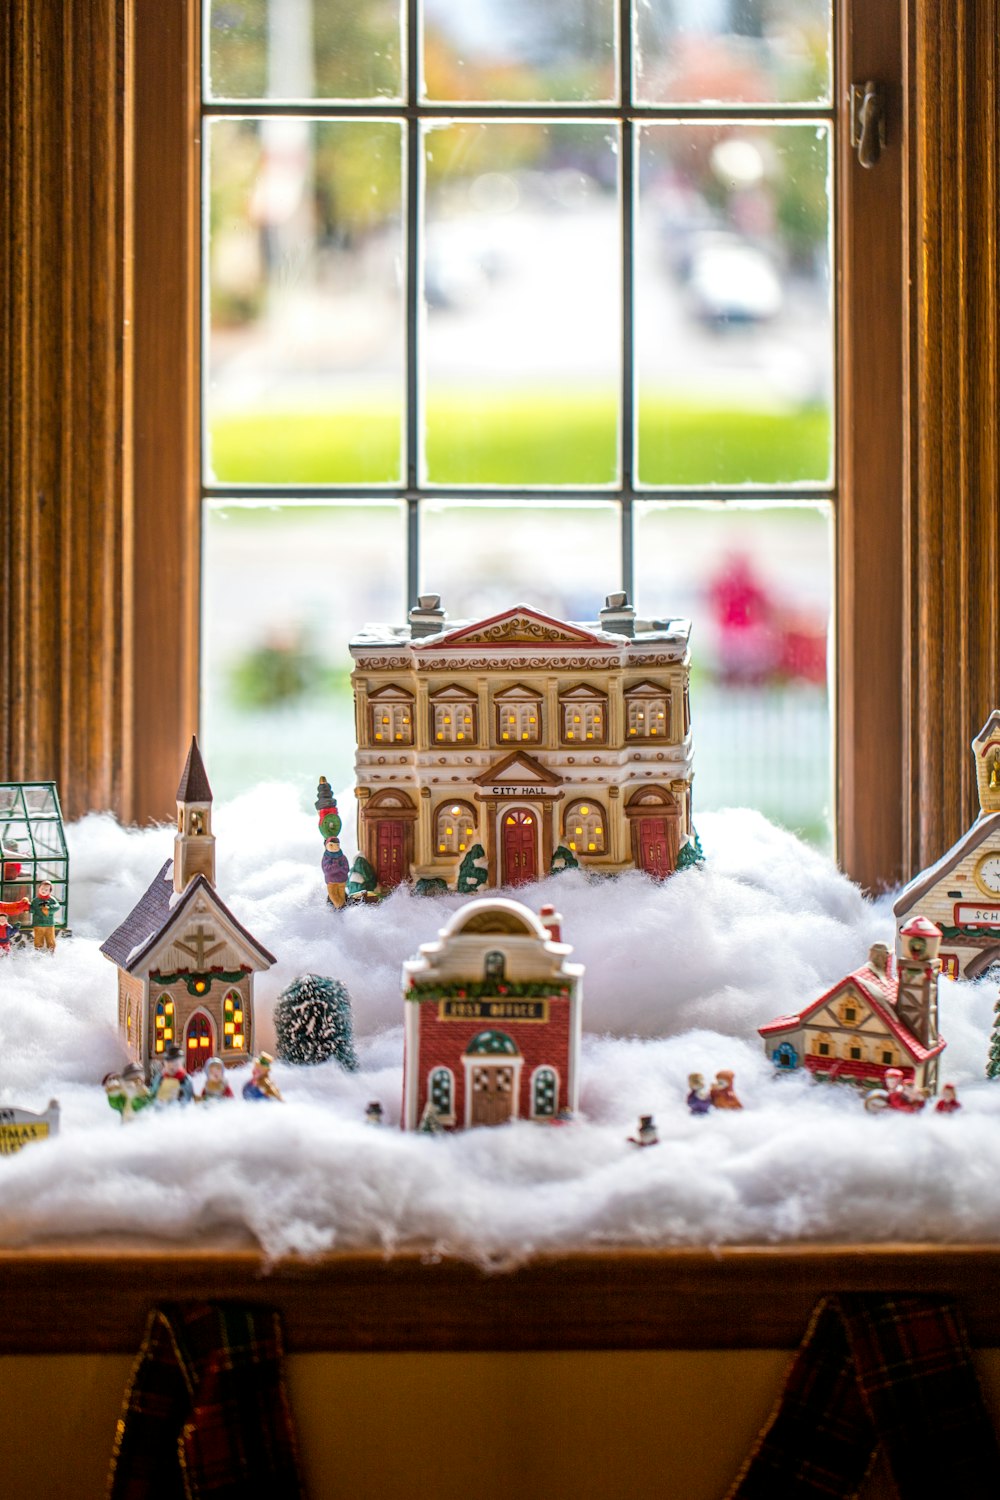 ceramic Christmas village displayed by the window